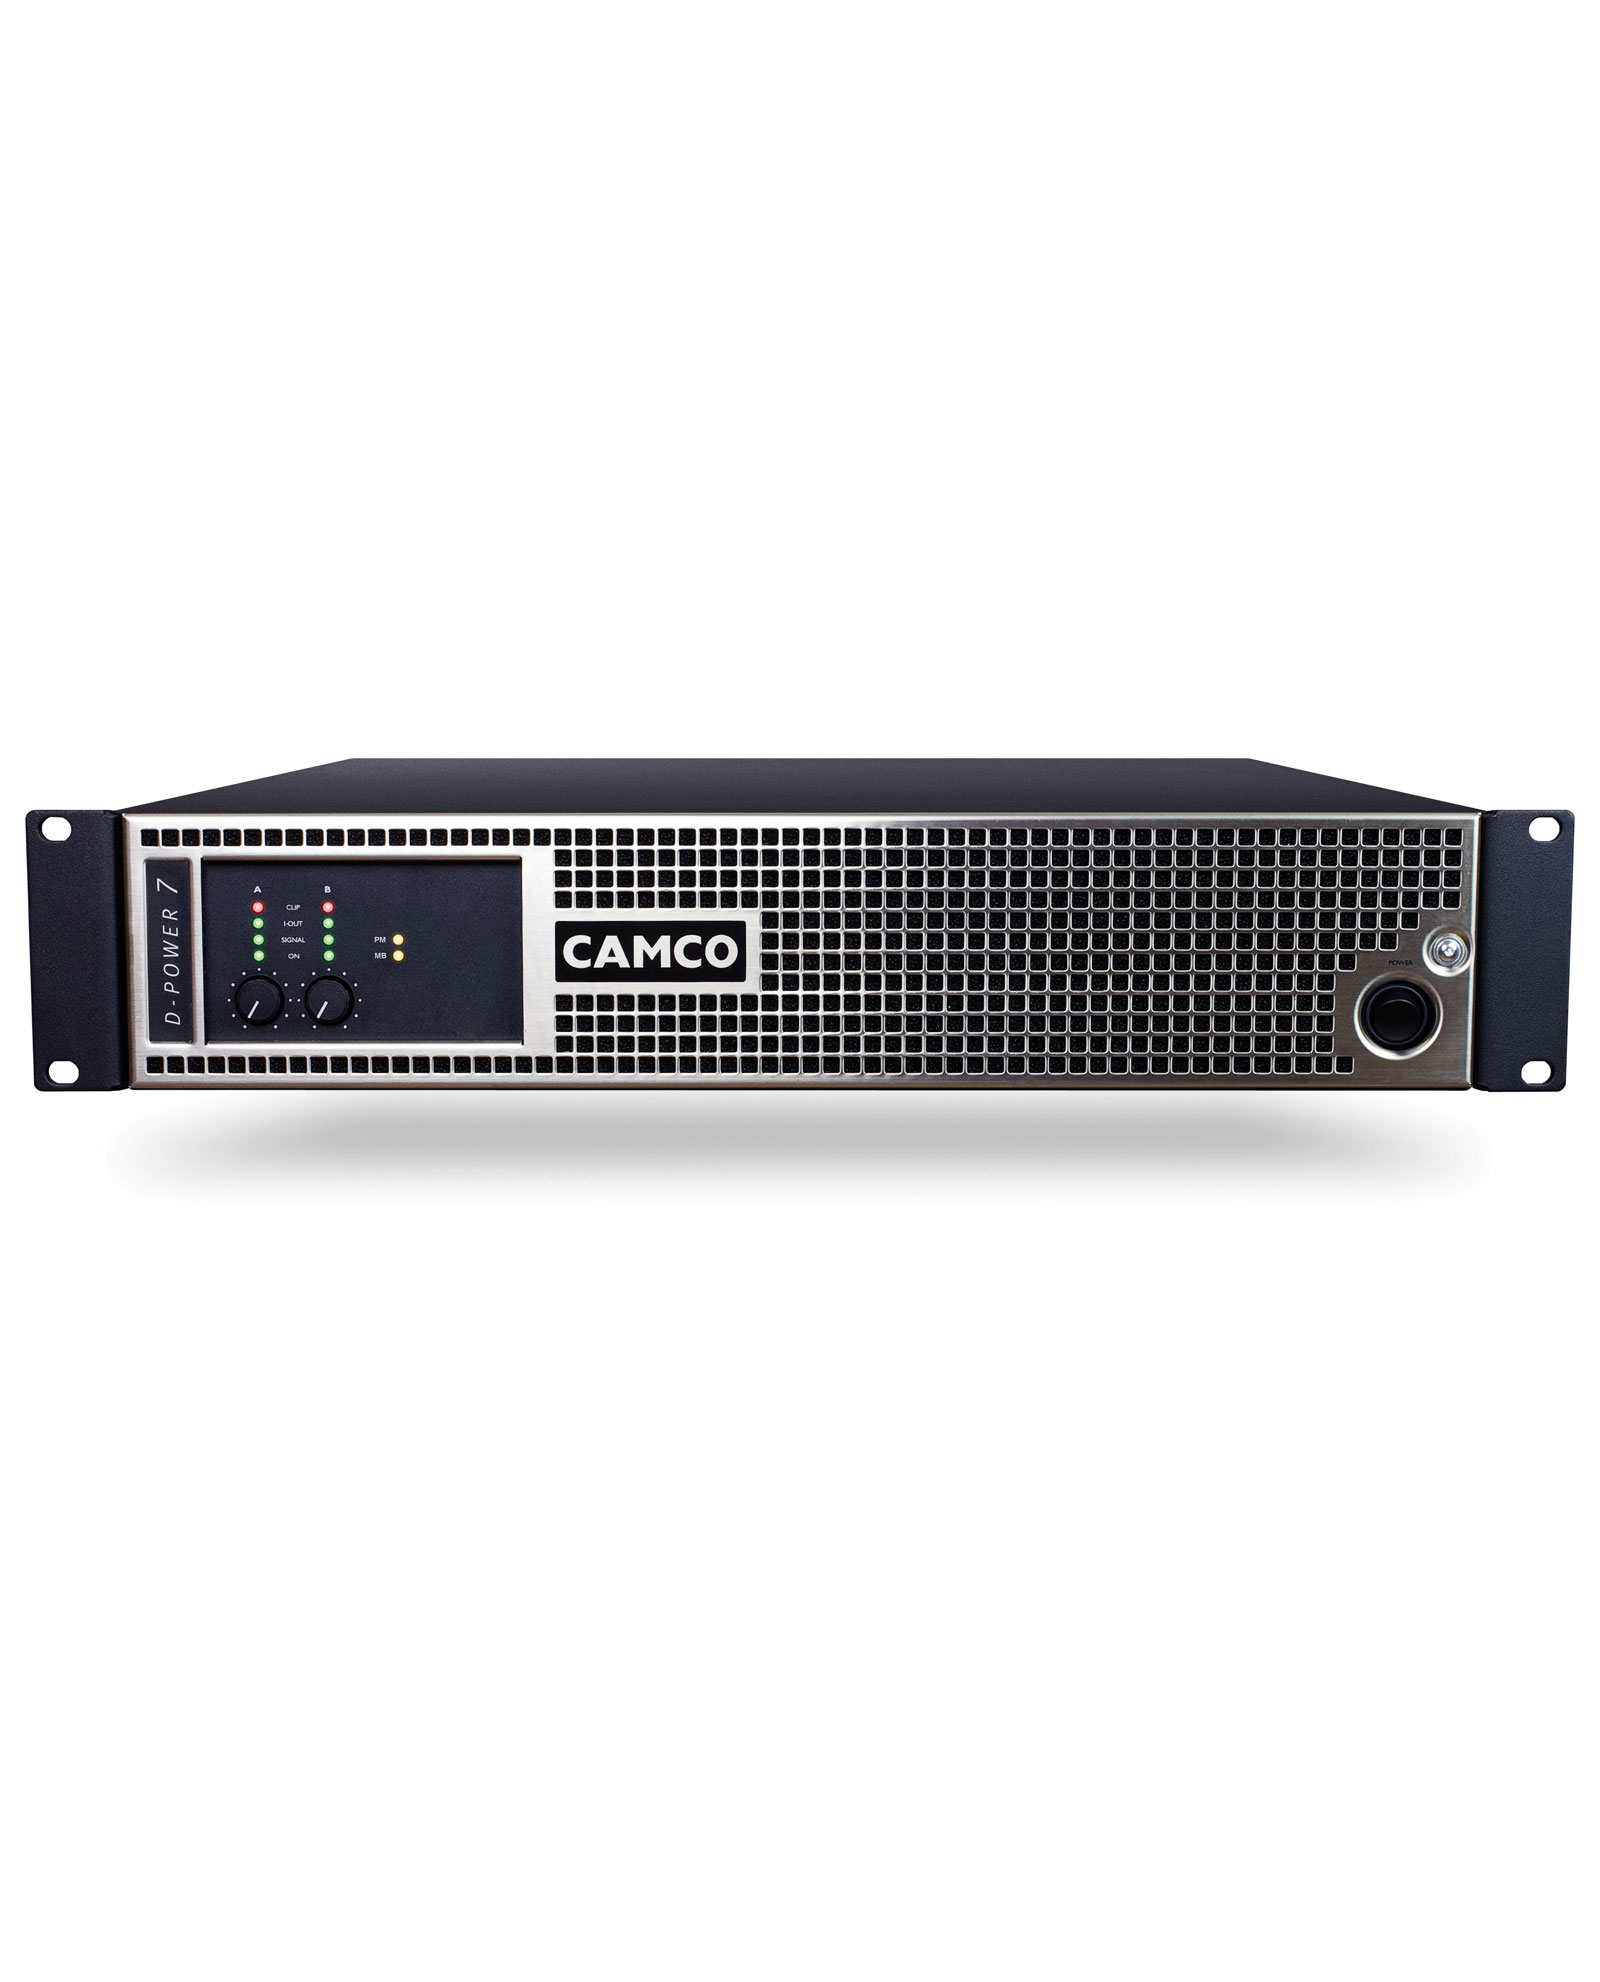 Camco D-Power 7 Amplifier